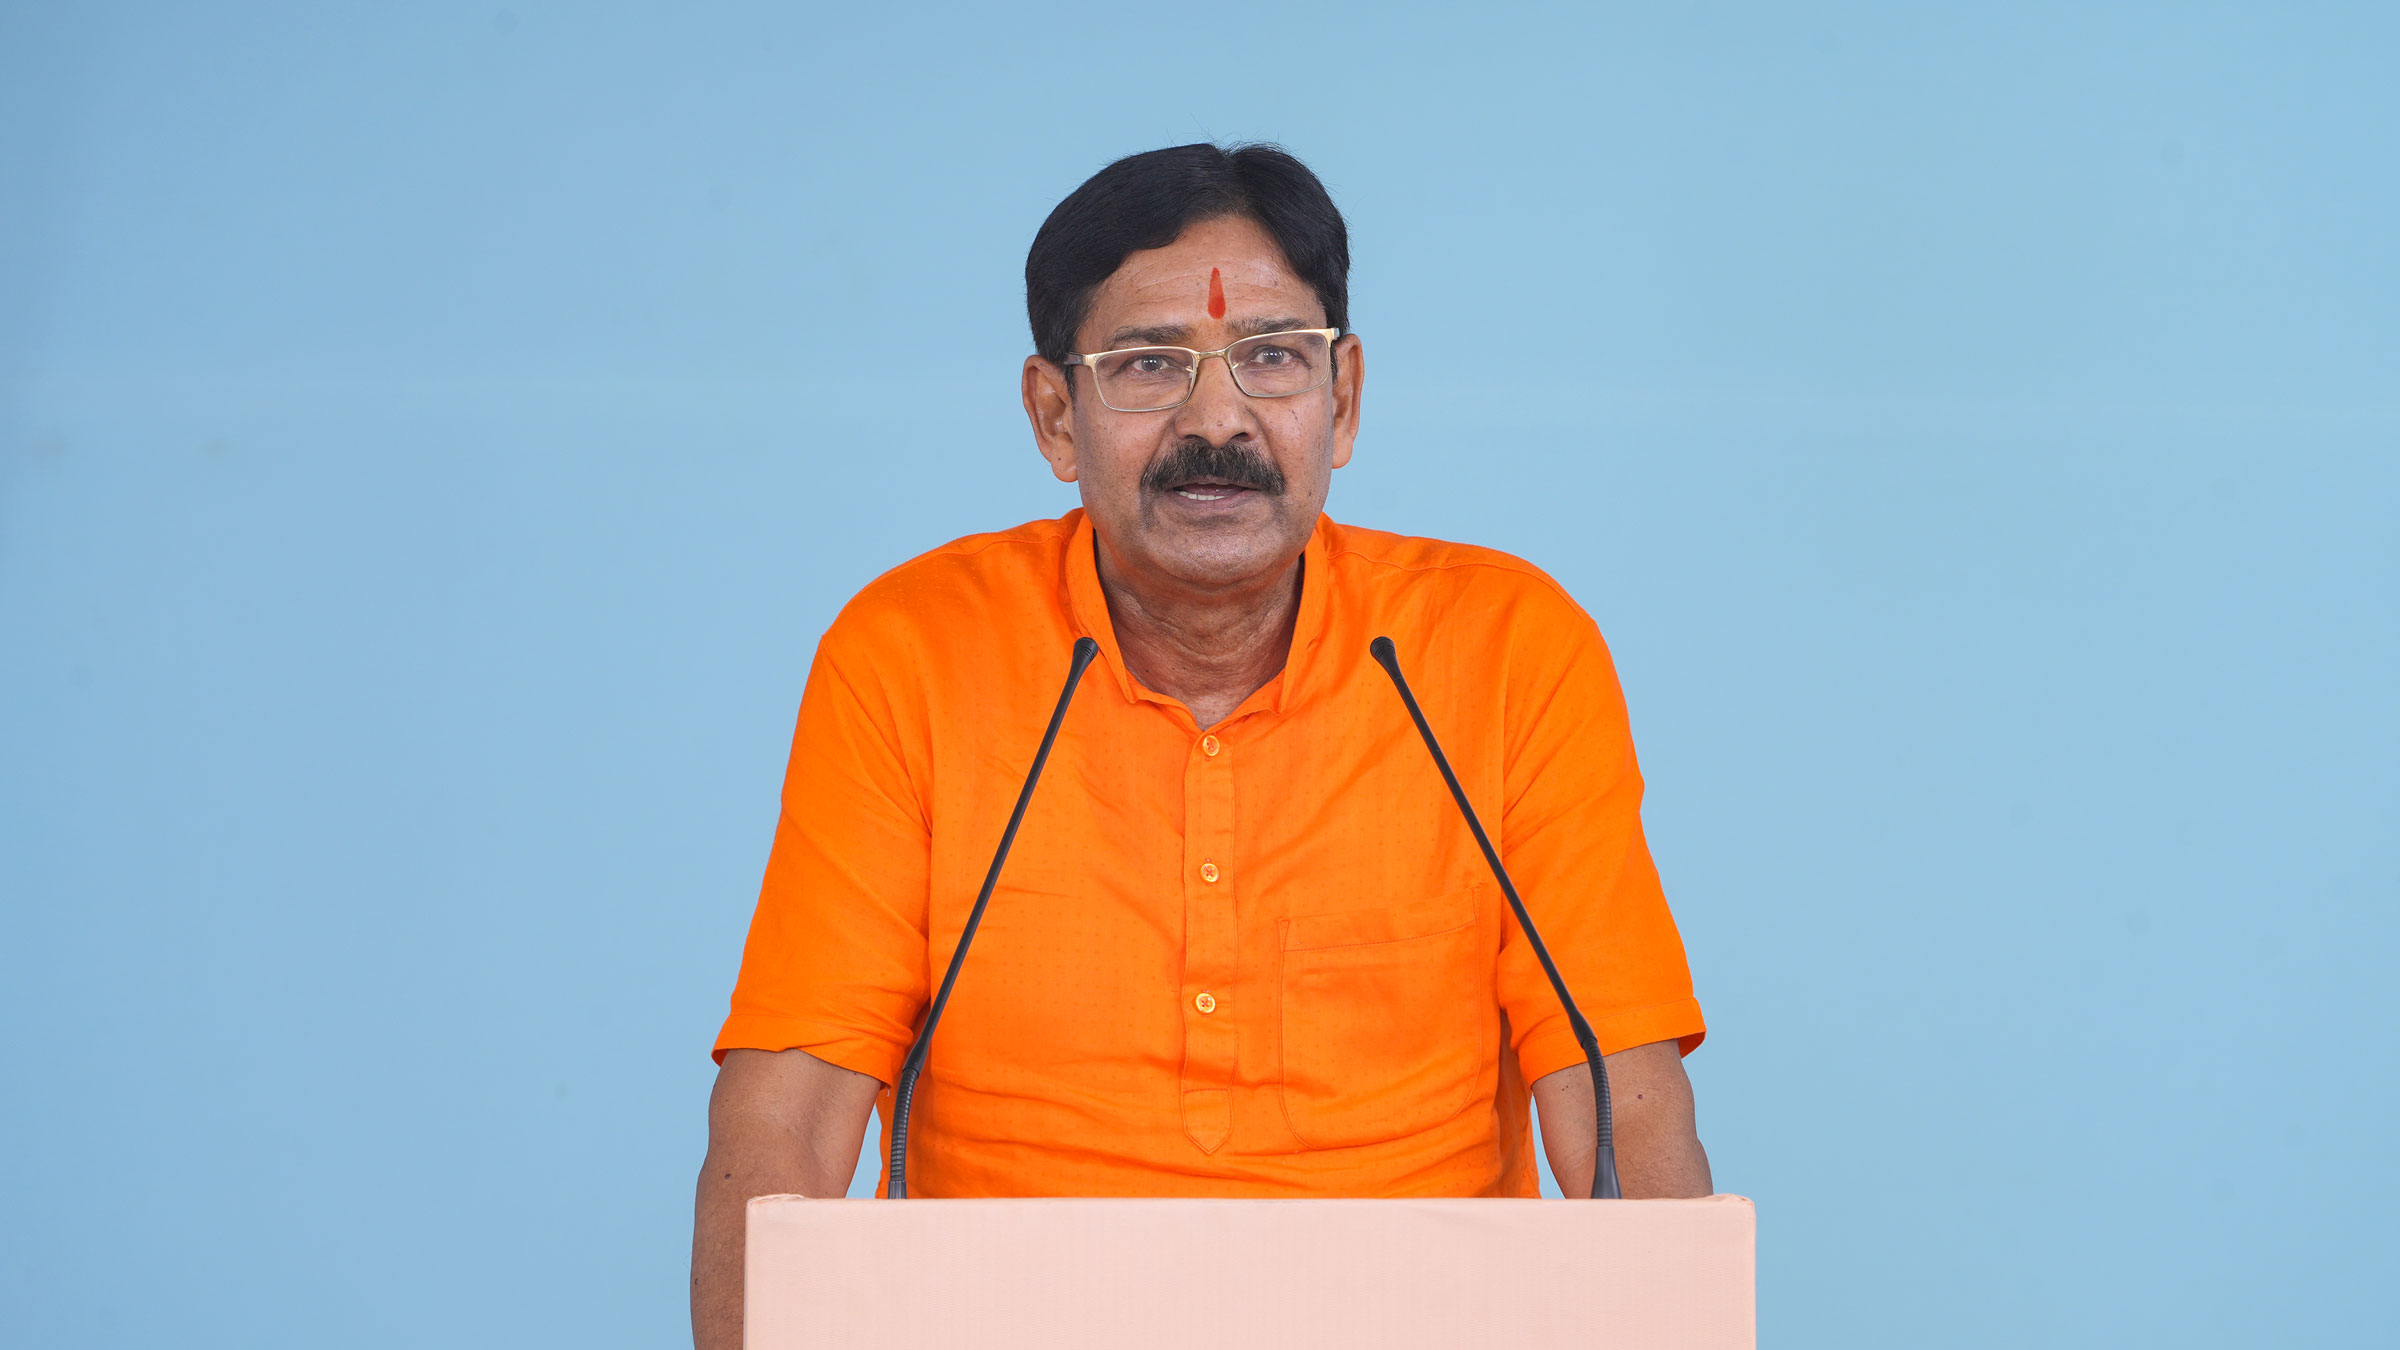 Mr Kamlesh Kumar Gupta (Assistant Manager, Lok Bharti, Uttar Pradesh), who attended the Mahotsav for the first time, said - After coming here, I learnt of which issues to work on and how so as to protect Hindutva.